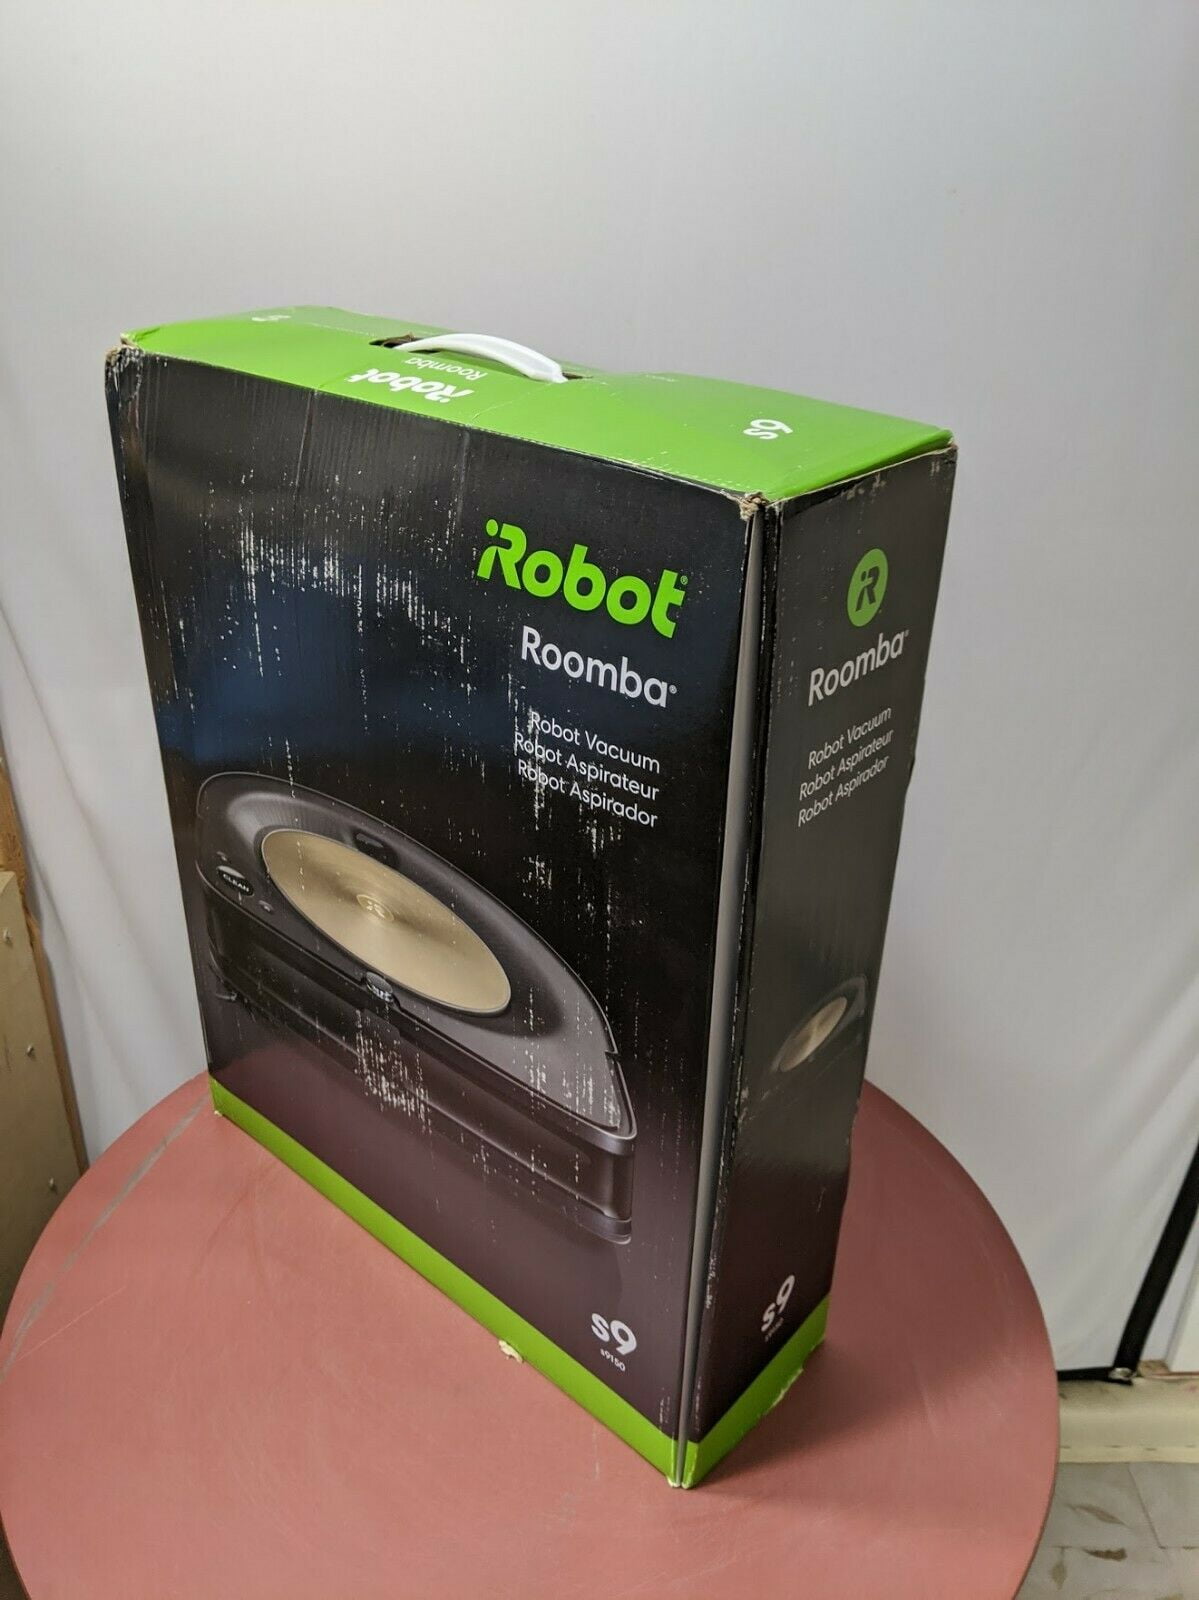 9150 Robot Vacuum- Wi-Fi Connected Powerful Suction Works with Alexa iRobot Roomba S9 Smart Mapping Ideal for Pet Hair Works With Clean Base